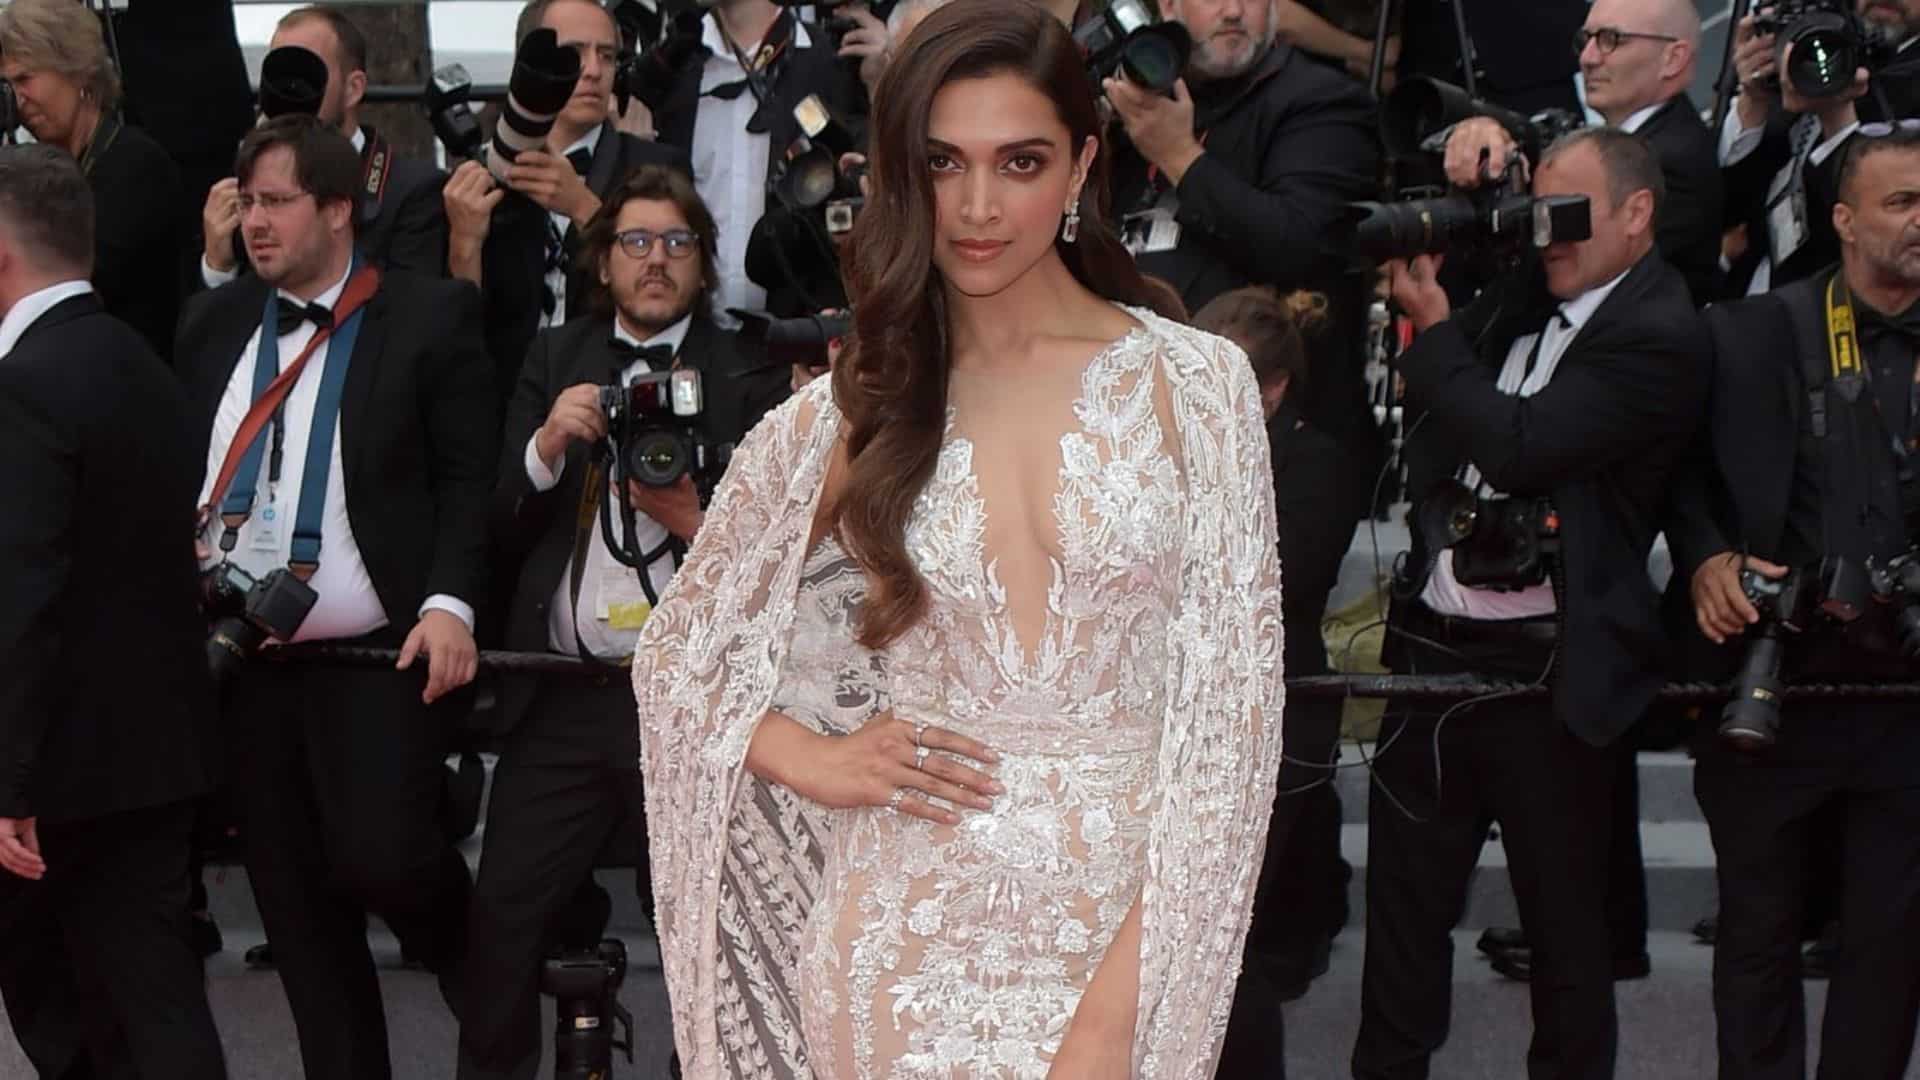 At Cannes 2018